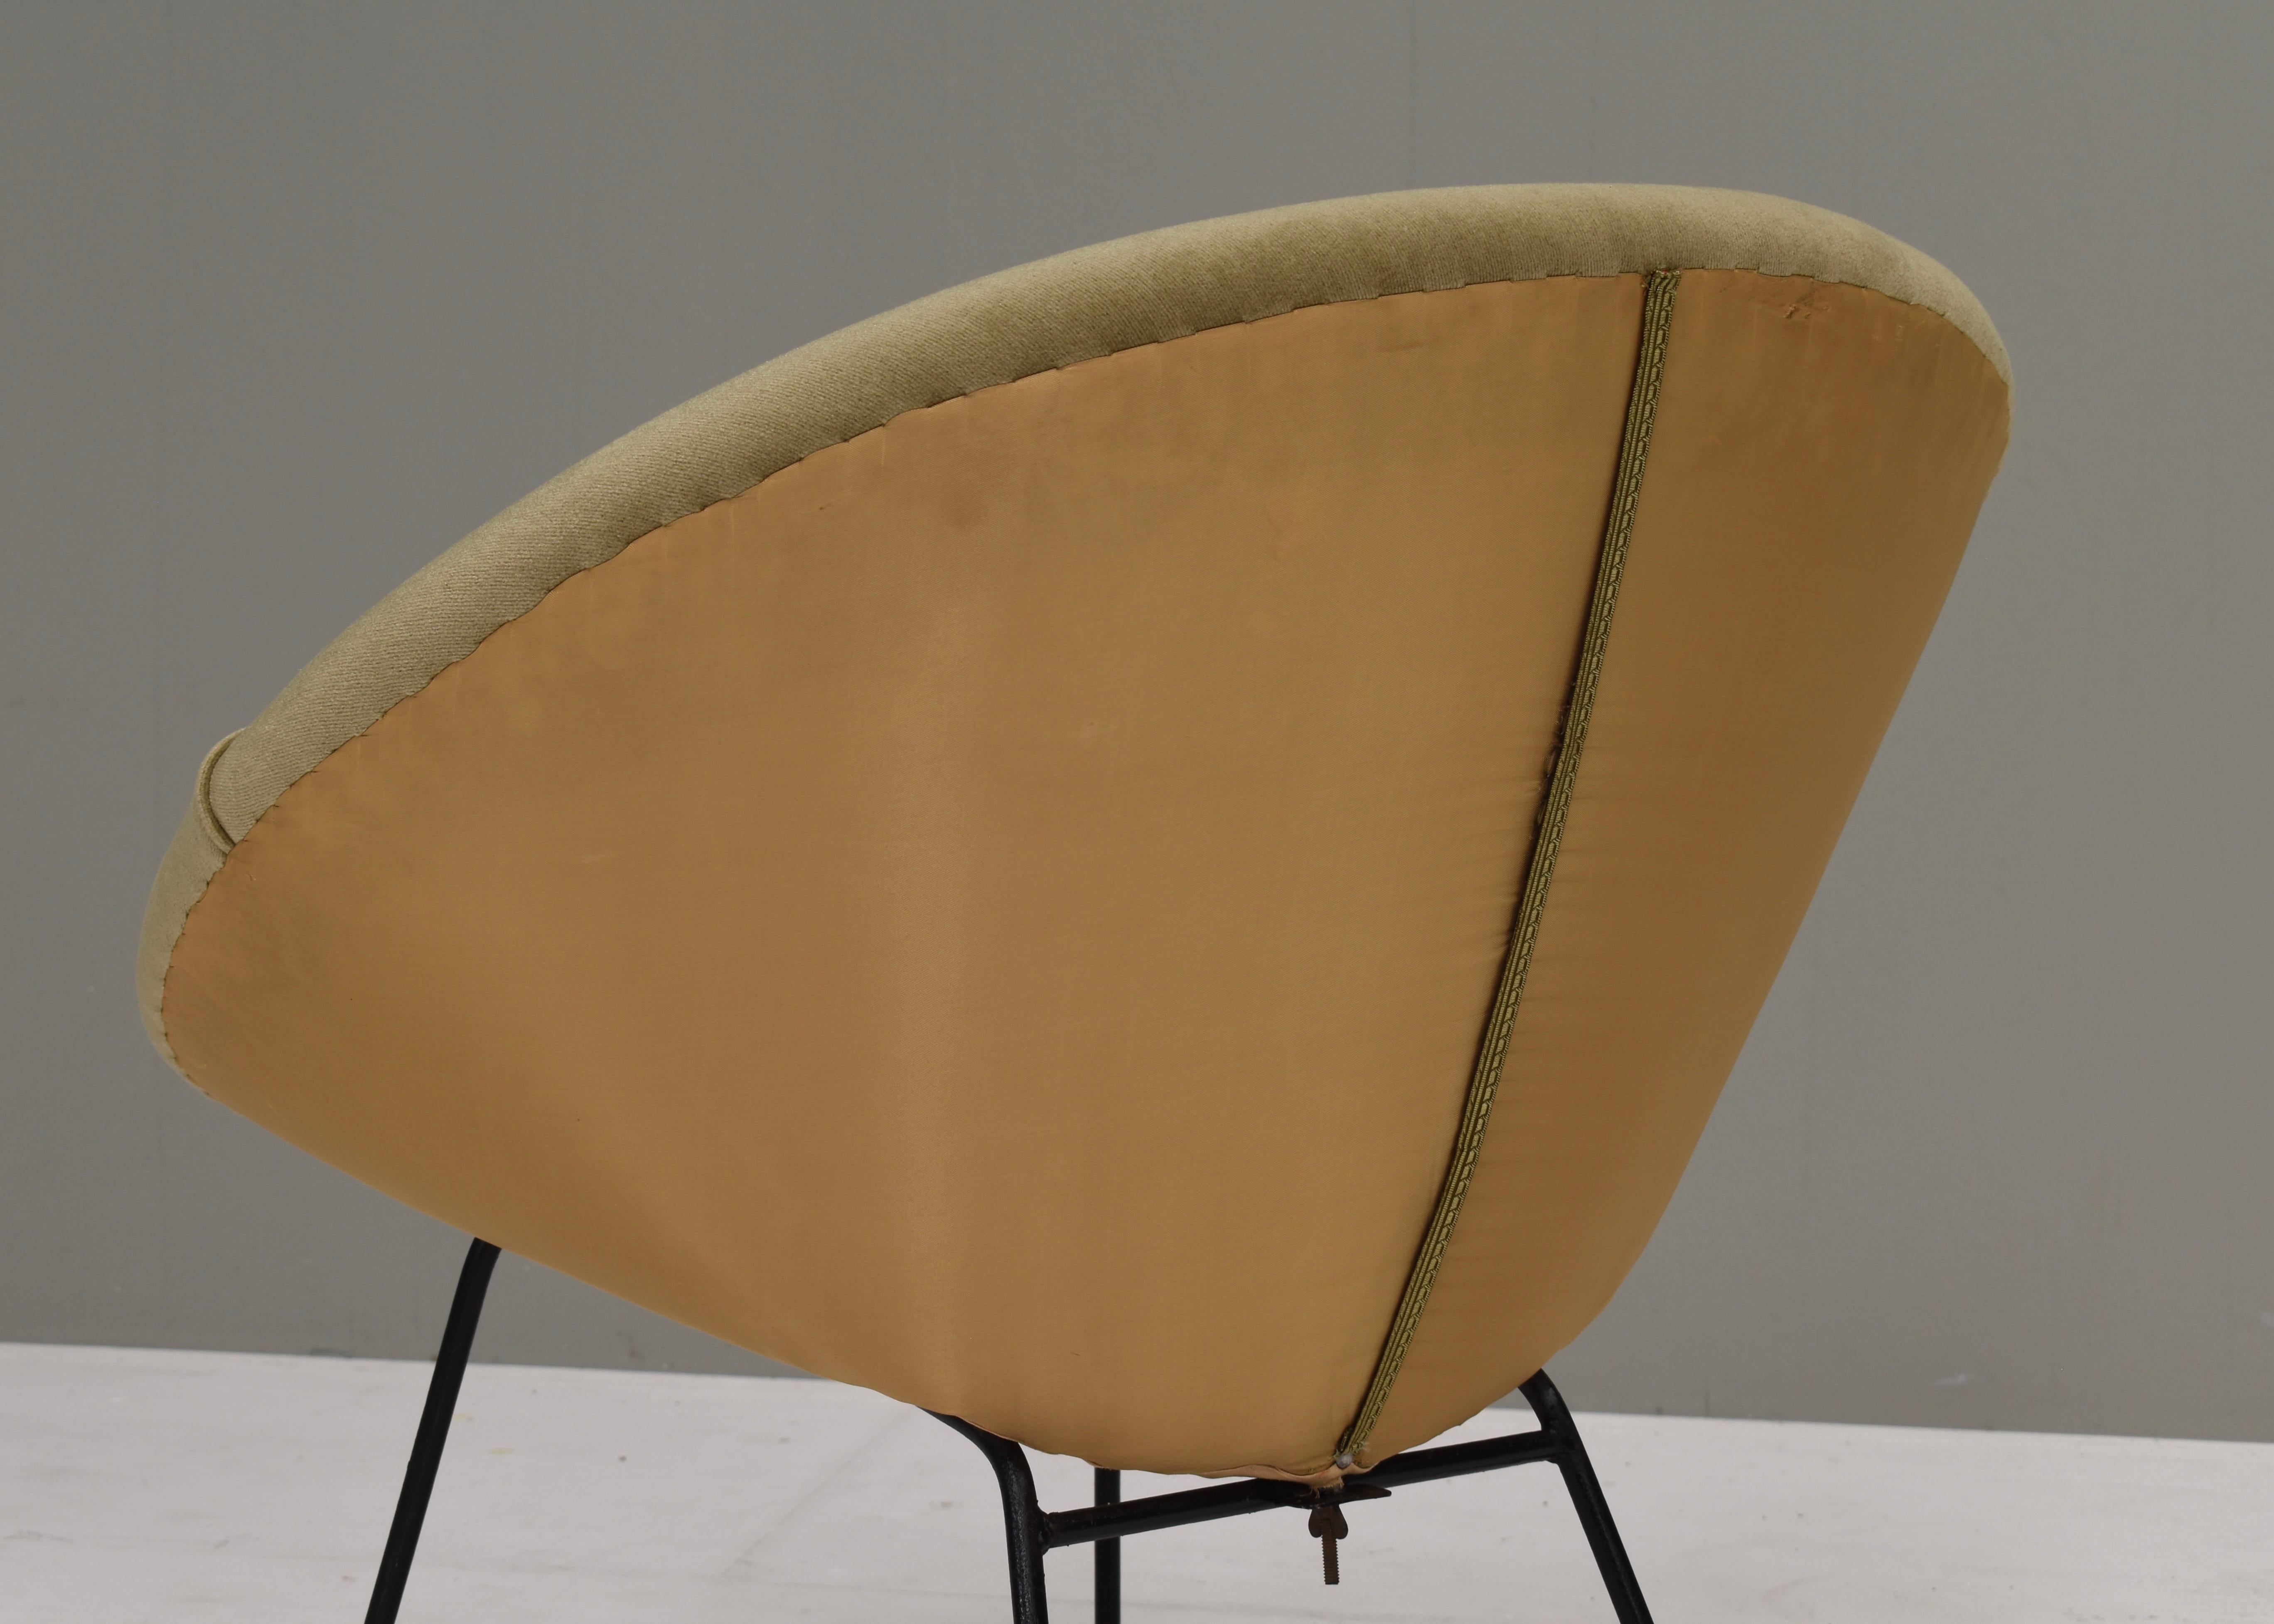 Sculptural Circle Chair in Original Mohair Velvet and Black Metal Base, 1950's For Sale 11